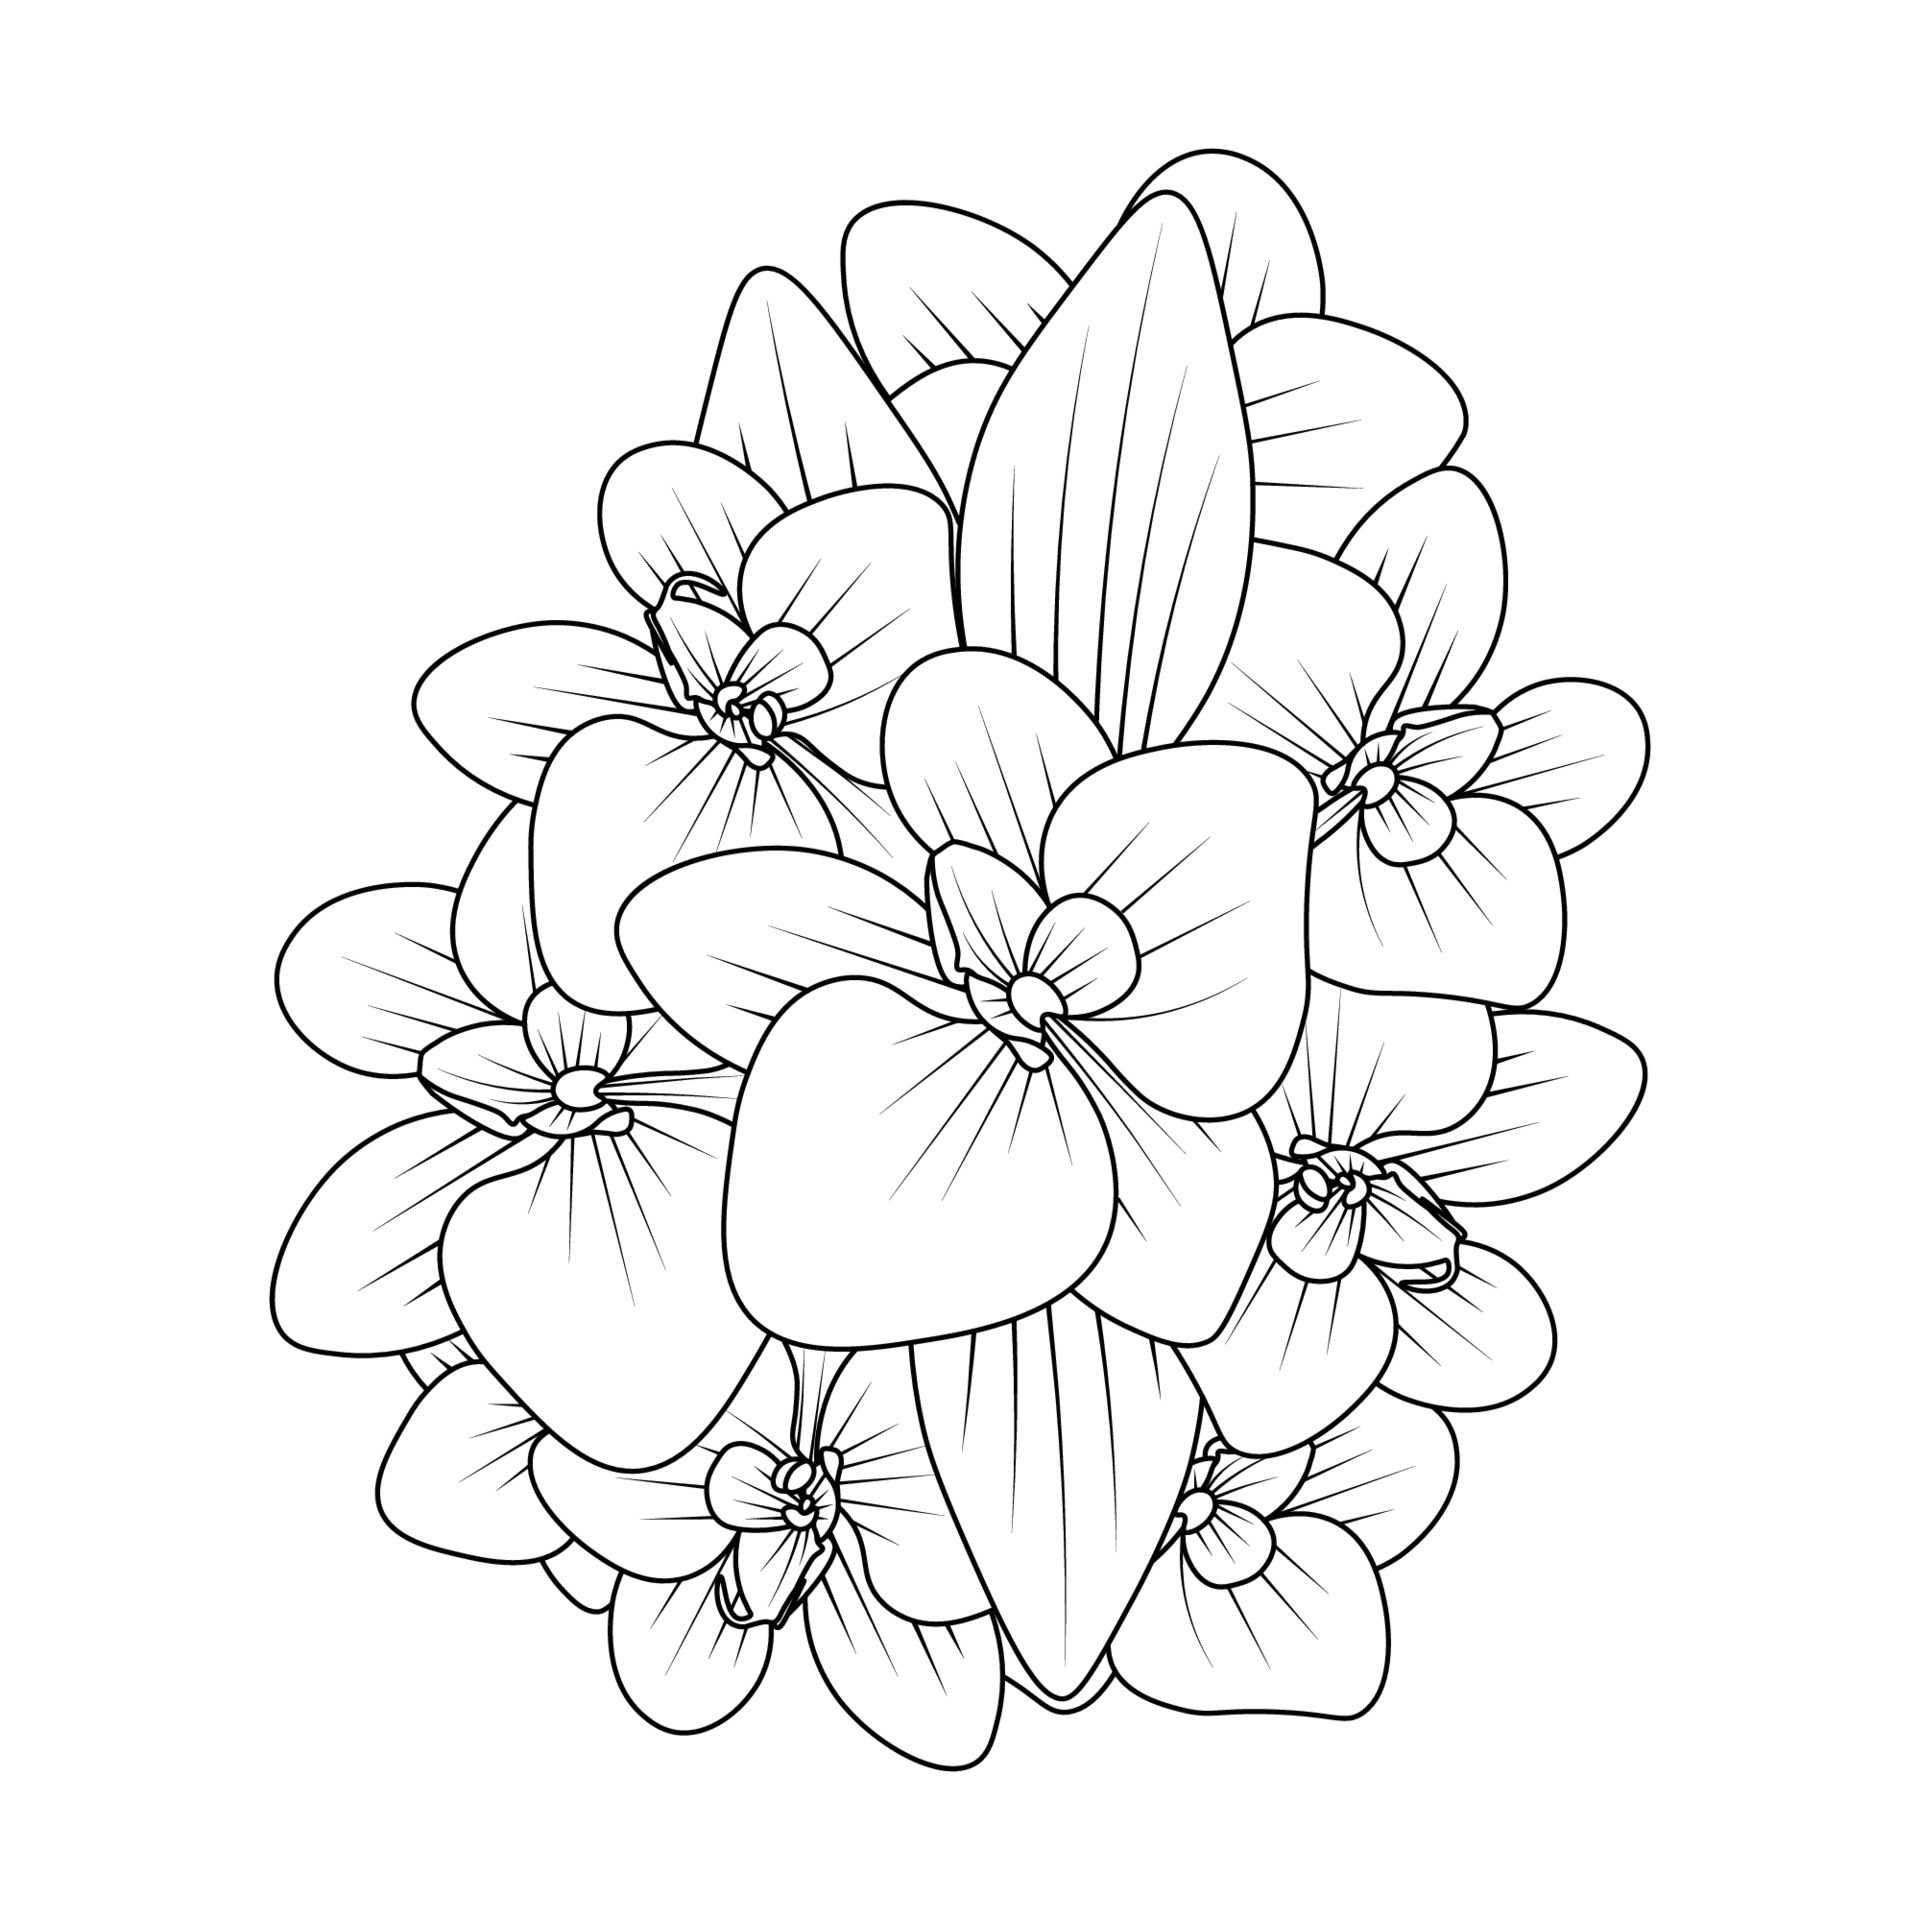 Orchid flower drawing illustration. Black and white with line art on white  backgrounds. - Stock Image - Everypixel